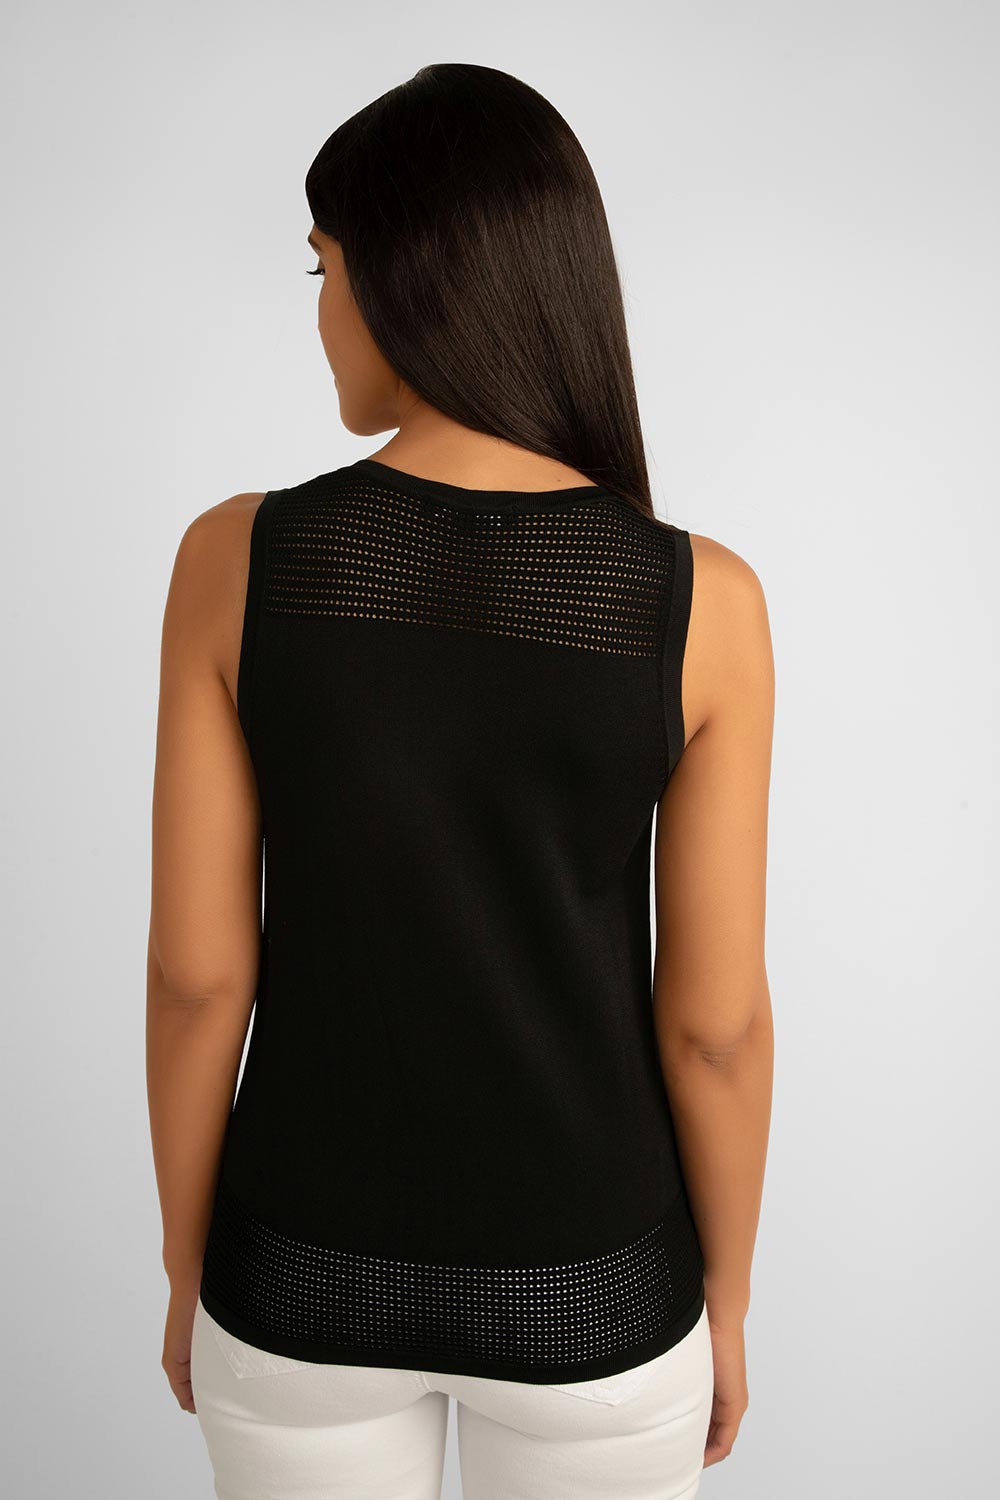 Picadilly (JK354) Women's Sleeveless Sweater Knit Tank with Mesh Panels on Shoulders and Hem in Black